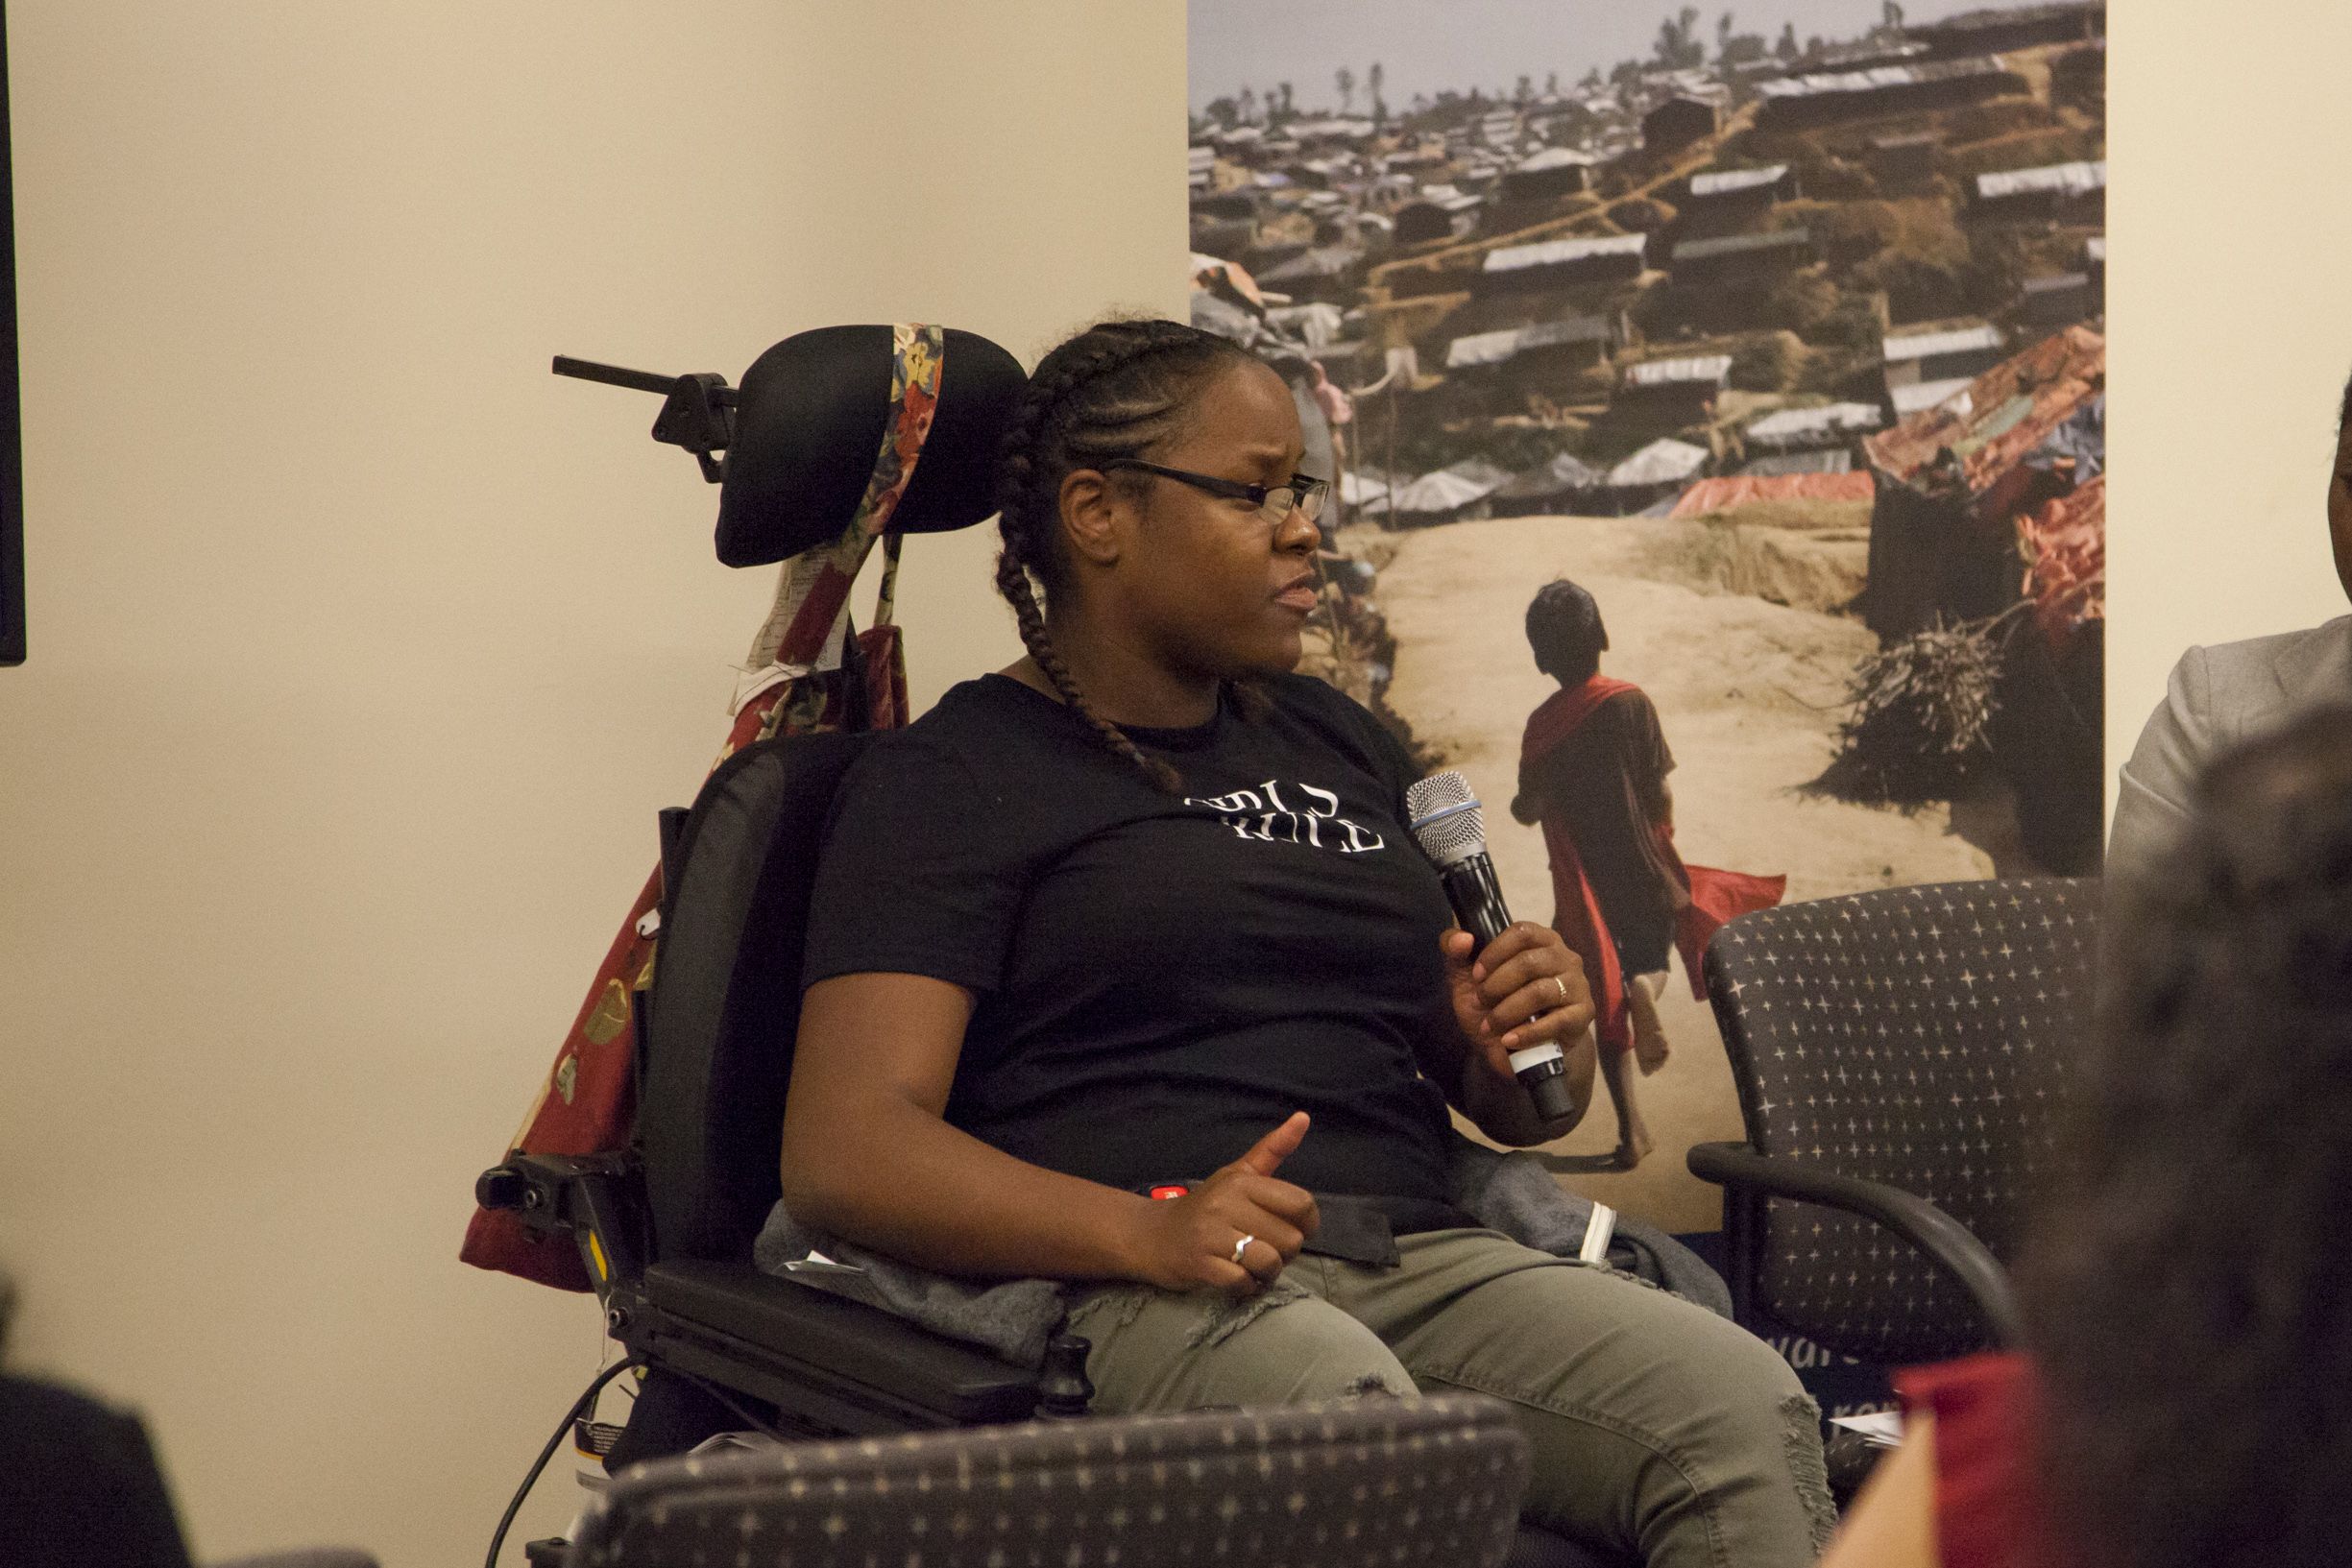 Alexis Smith (City Colleges of Chicago) presents her global reporting project at 2018 Washington Weekend. Image by Jin Ding. United States, 2018.